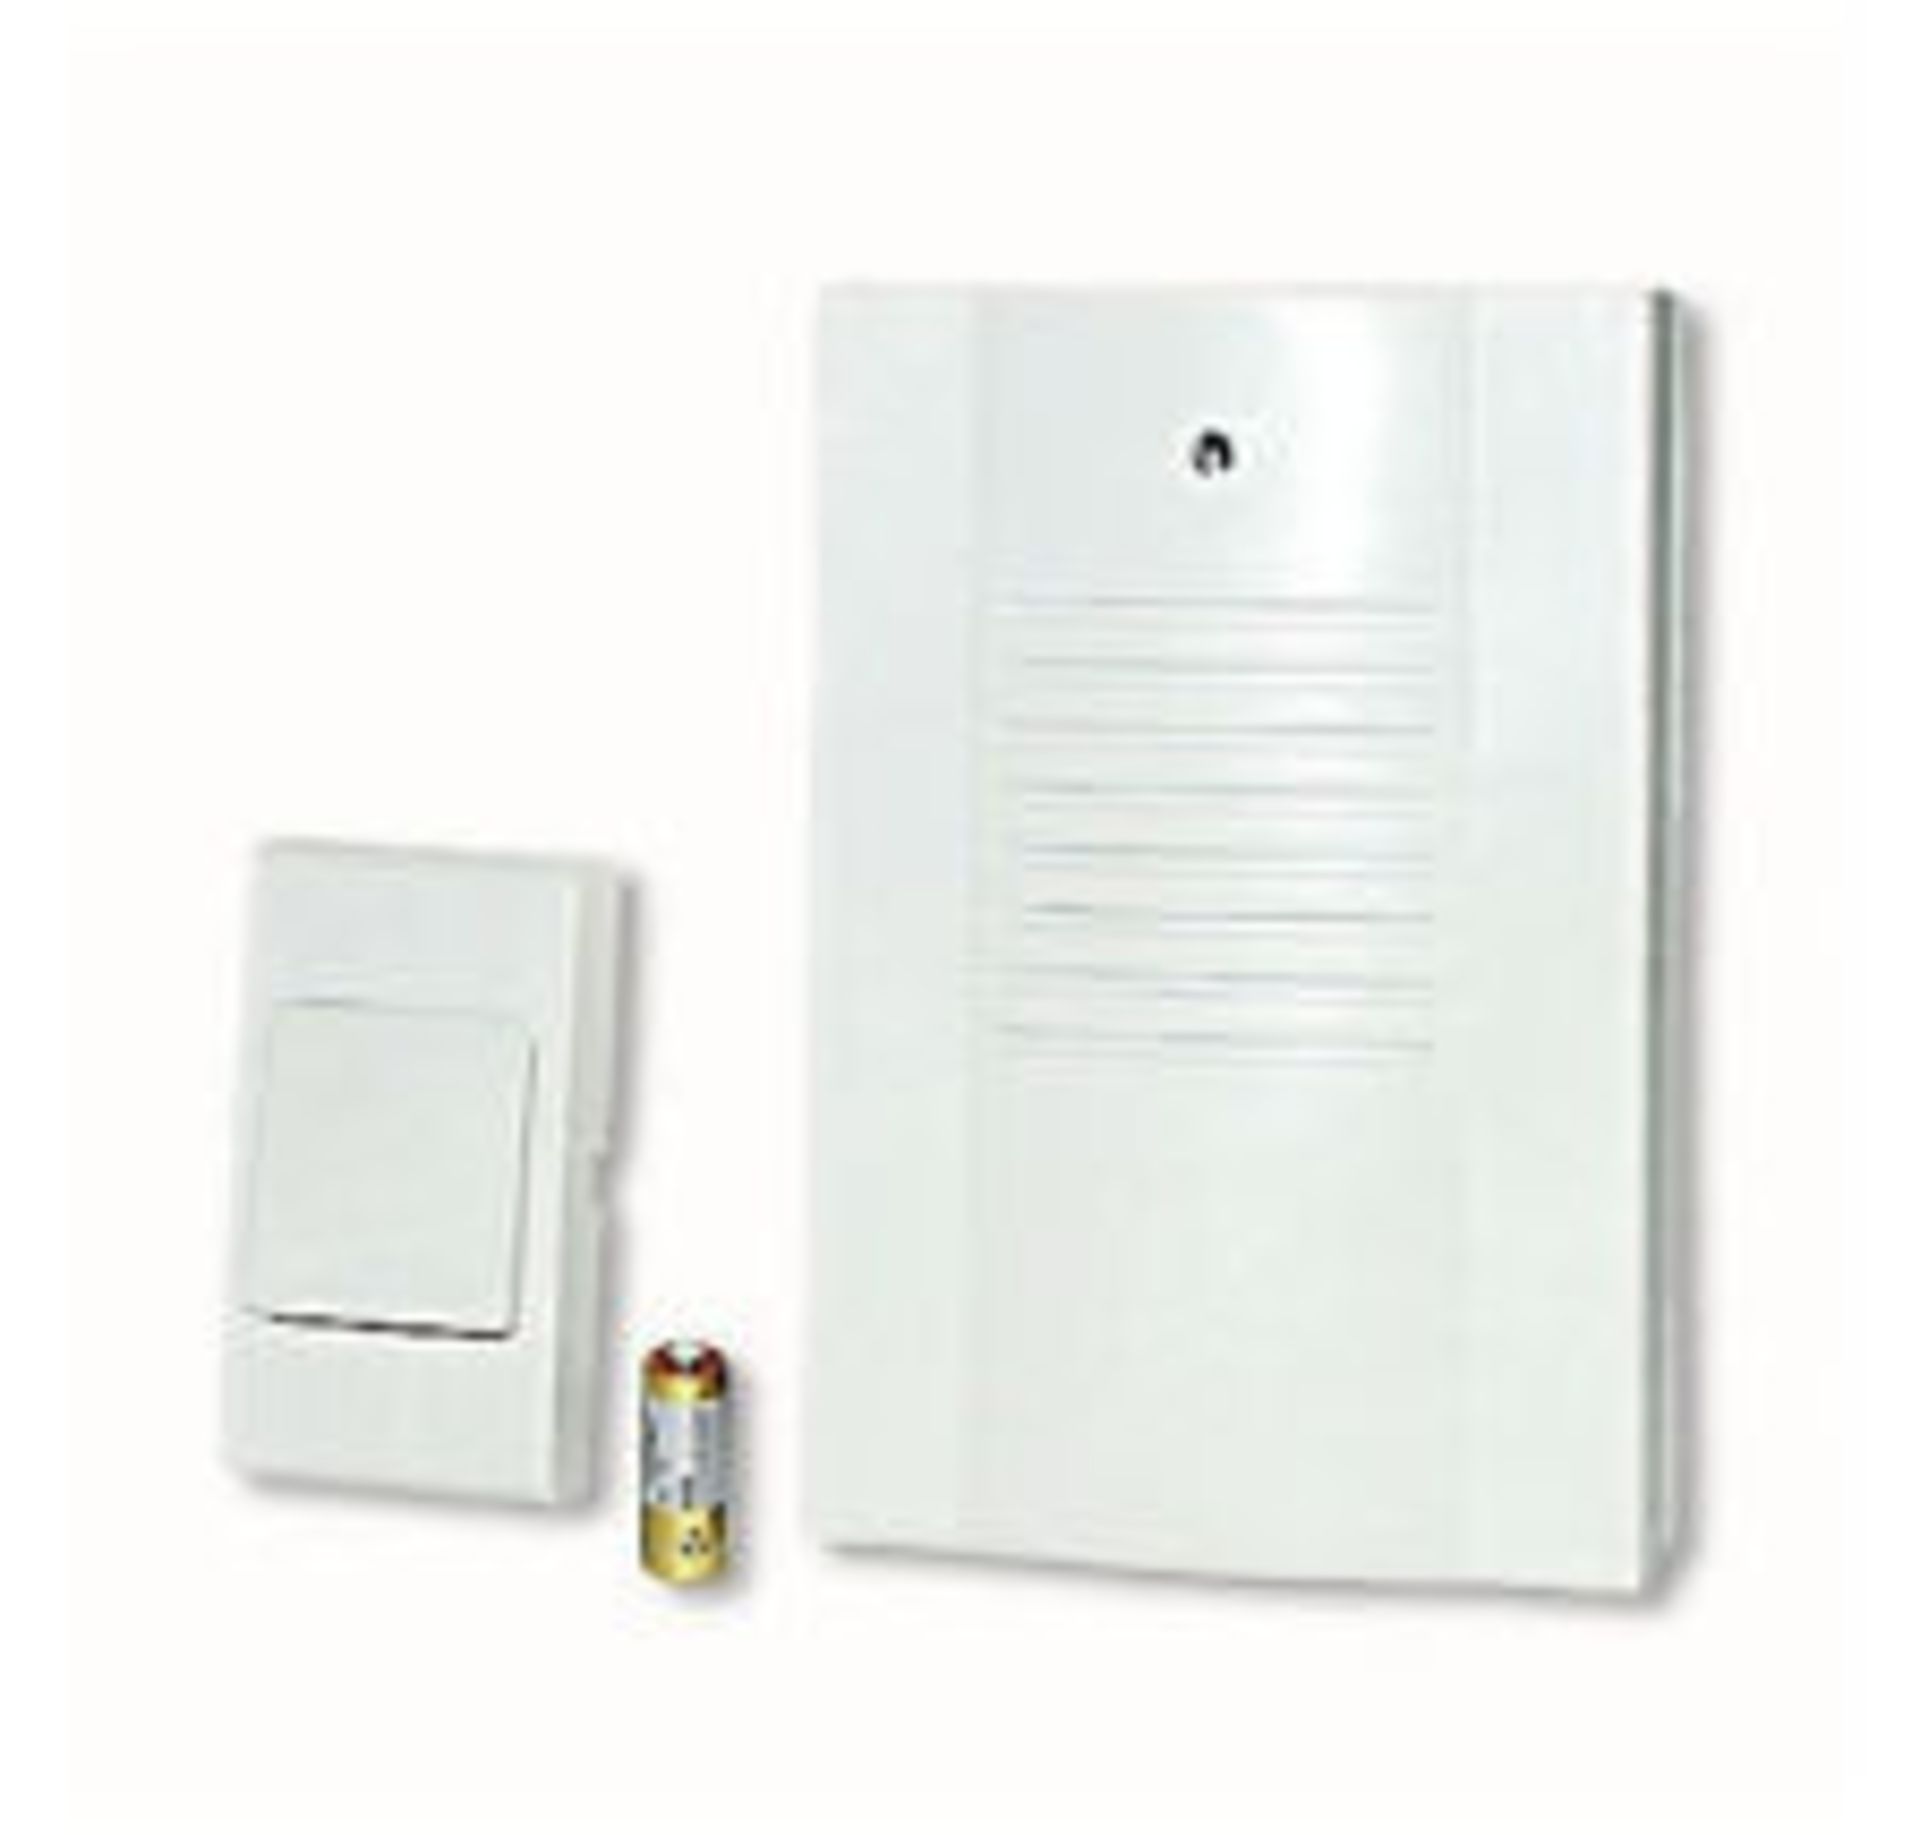 V Brand New Wireless Doorbell With 16 Different Melodies And Up To 30 Metre Range - Image 2 of 2